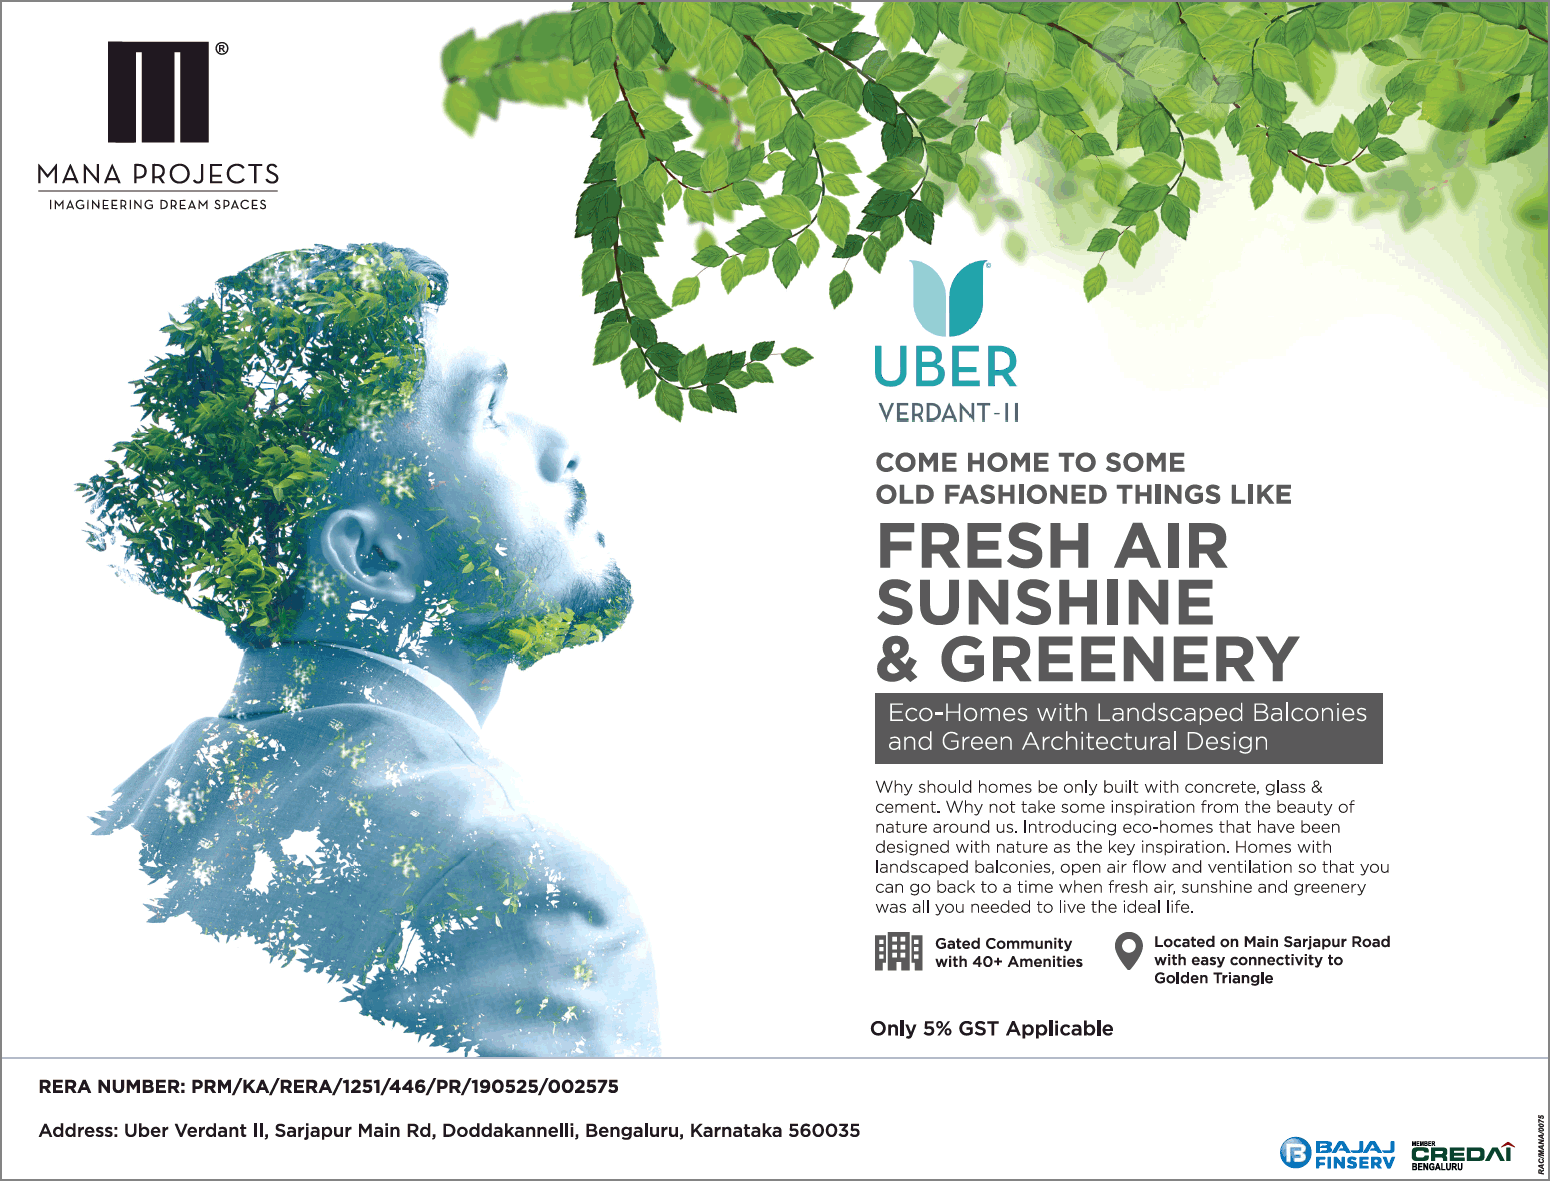 Eco-homes with landscaped balconies and green architectural design at Mana Uber Verdant 2, Bangalore Update